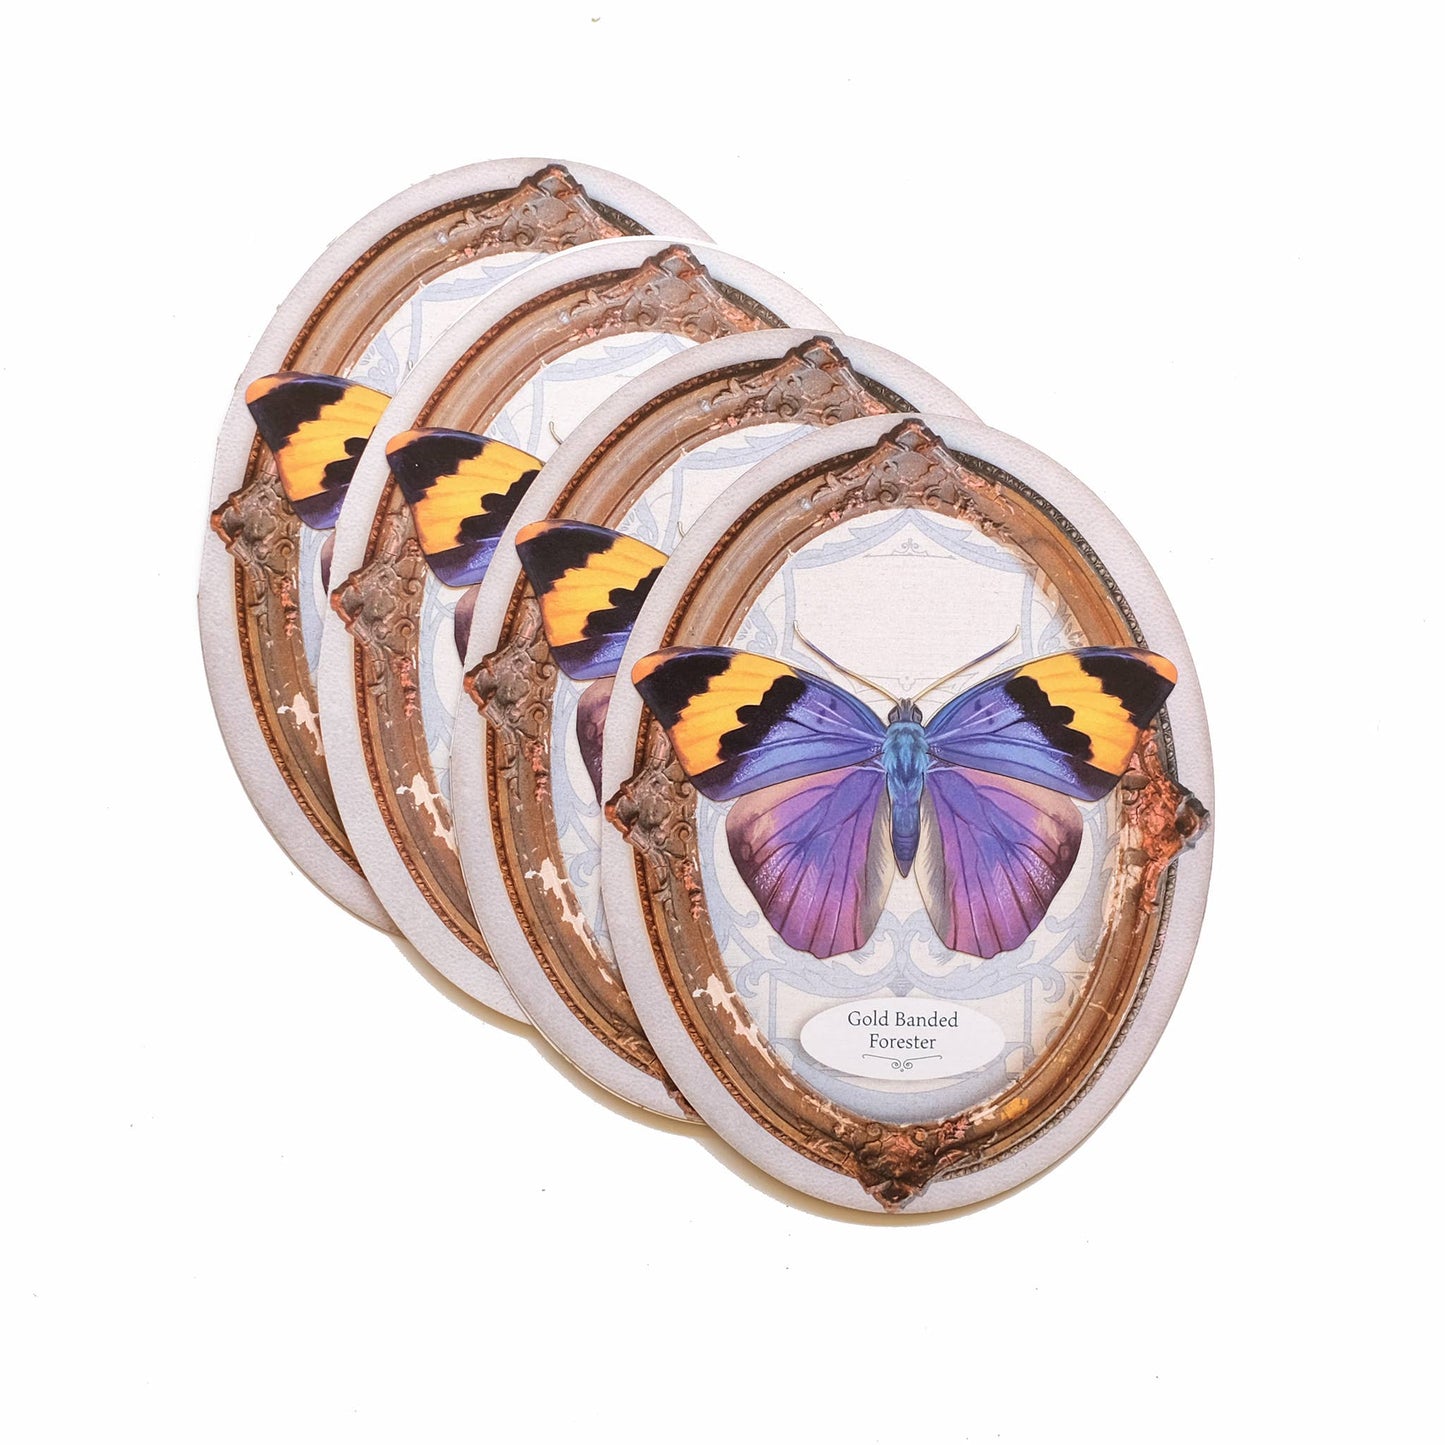 Gold Banded Forester Butterfly Oval Greeting Card